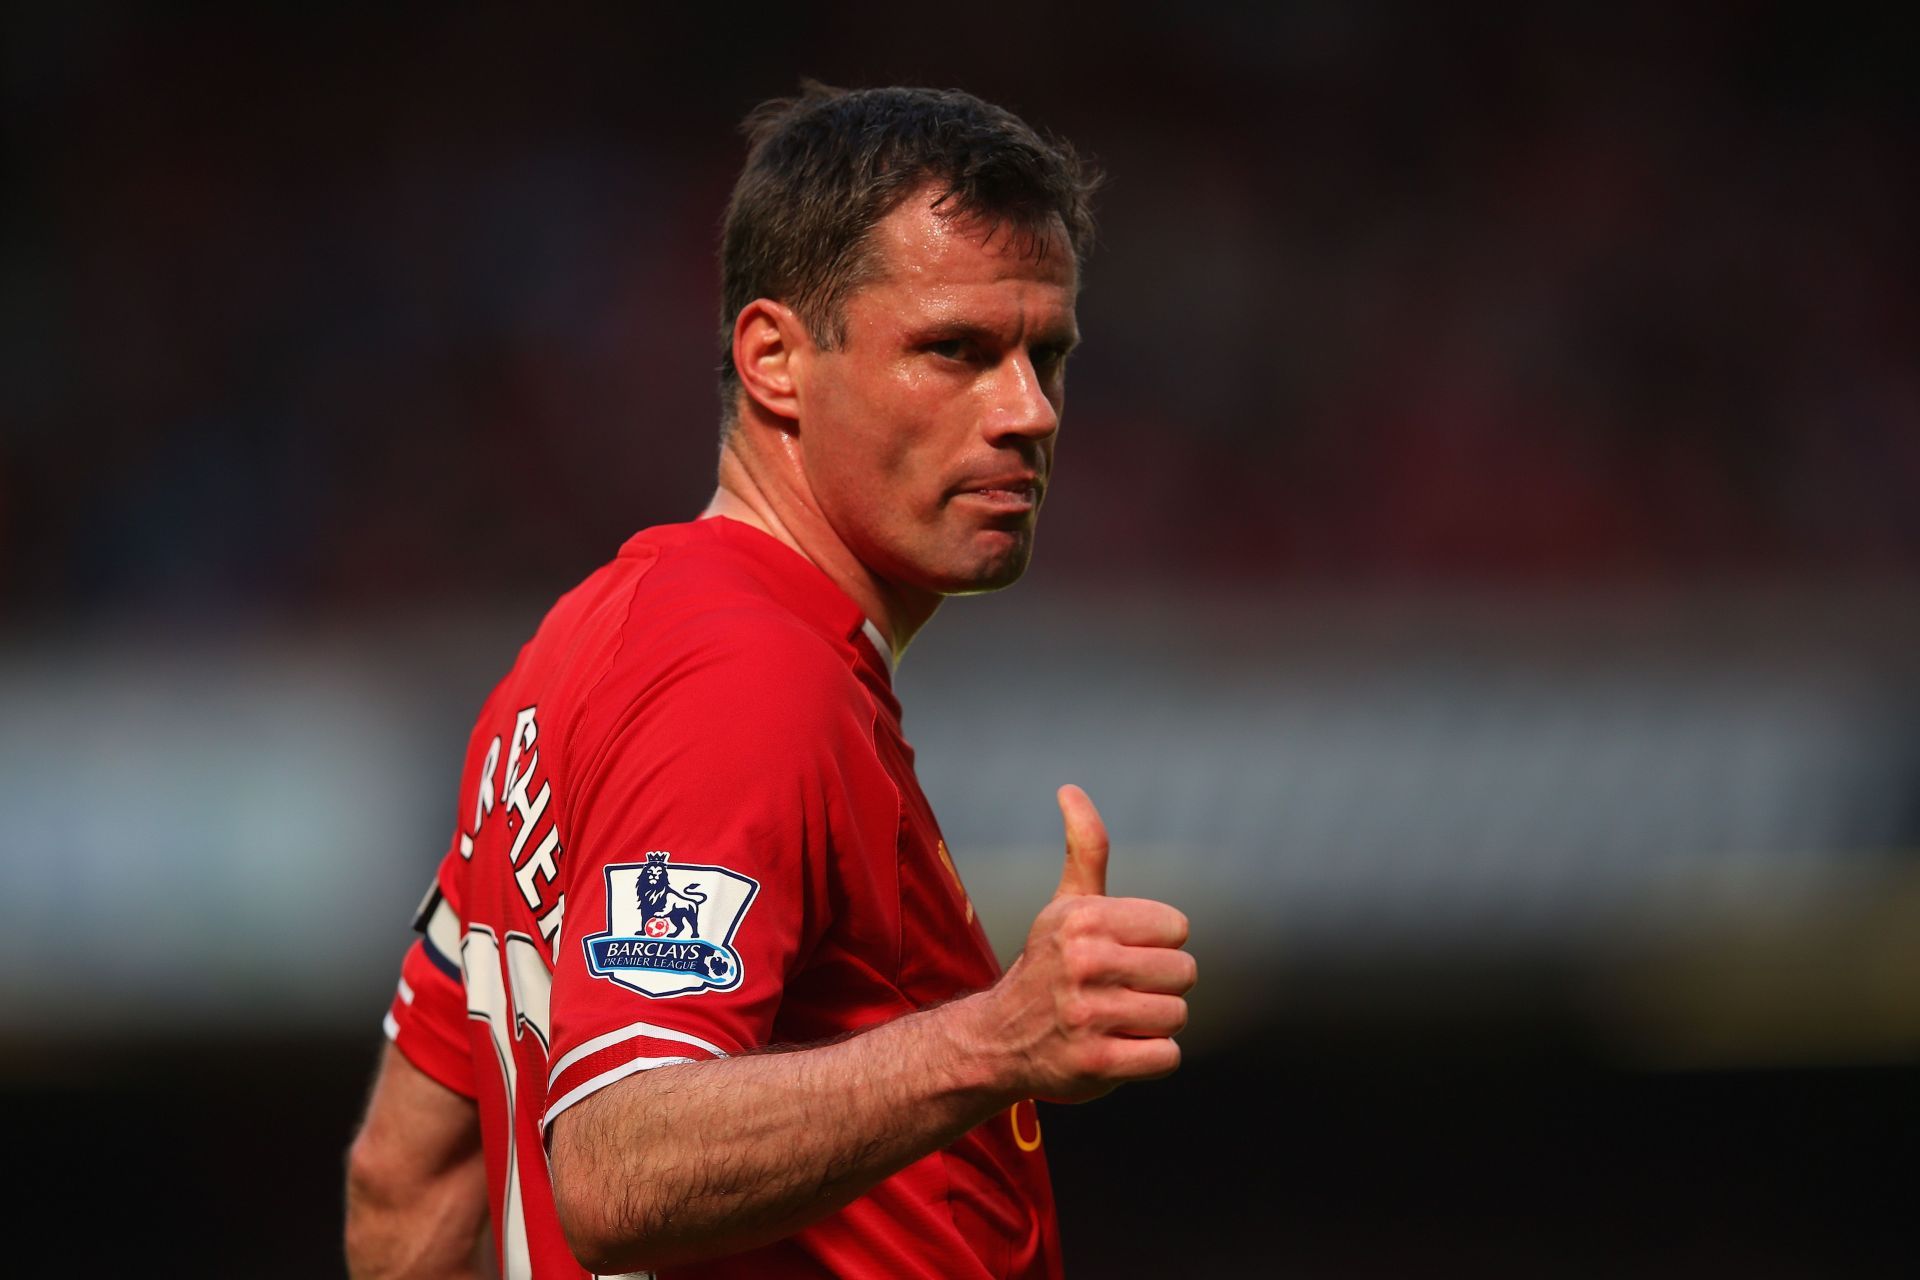 Jamie Carragher has more own goals than goals for Liverpool